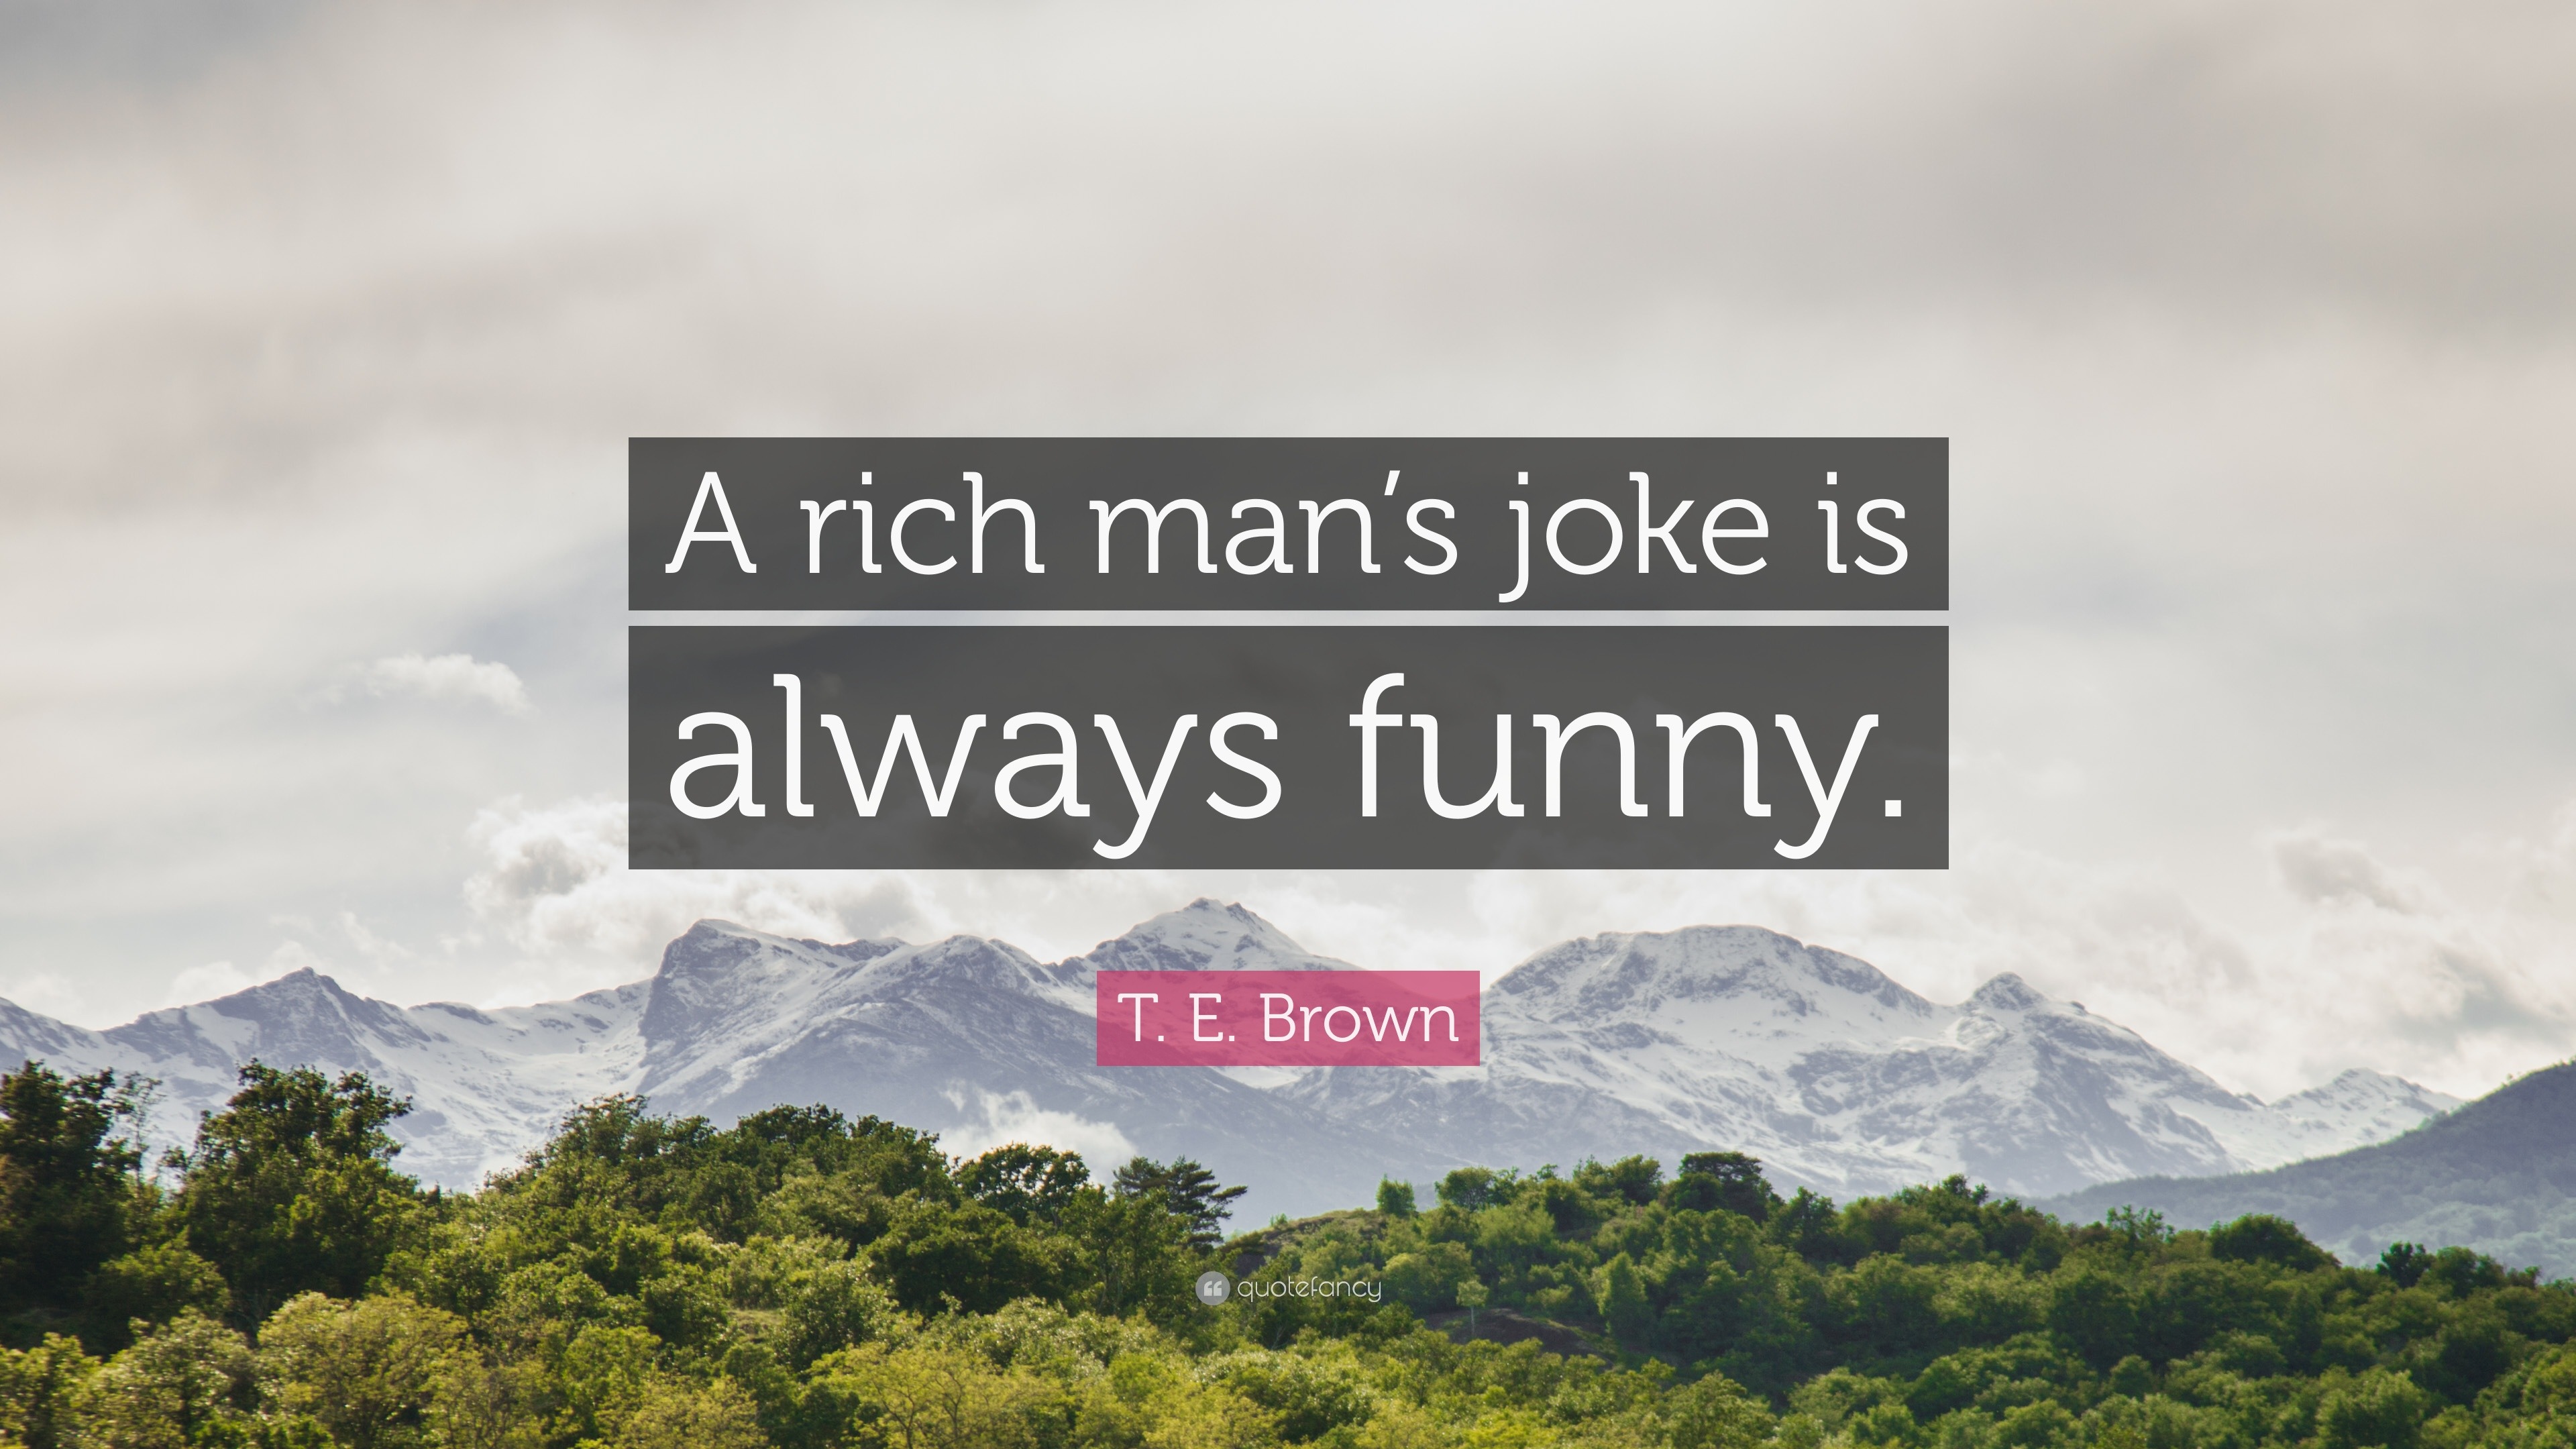 T. E. Brown Quote: “A rich man's joke is always funny.”